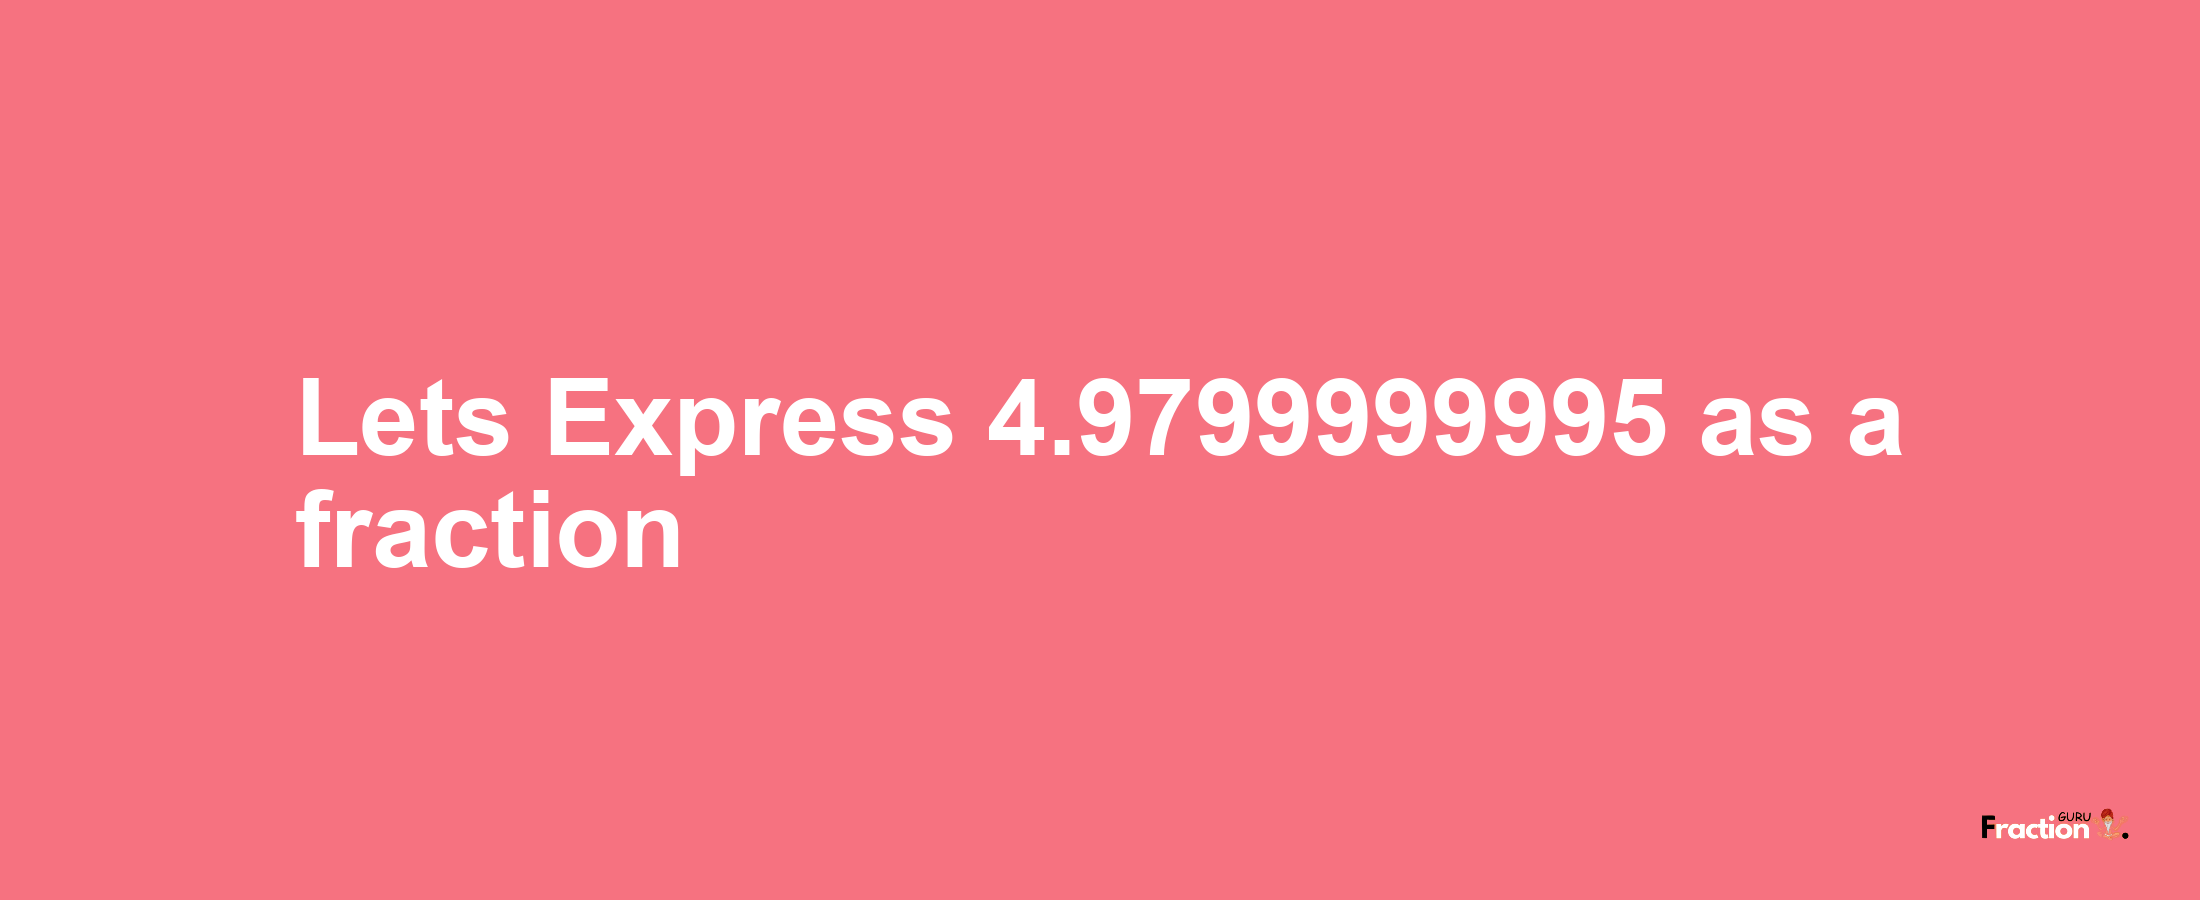 Lets Express 4.9799999995 as afraction